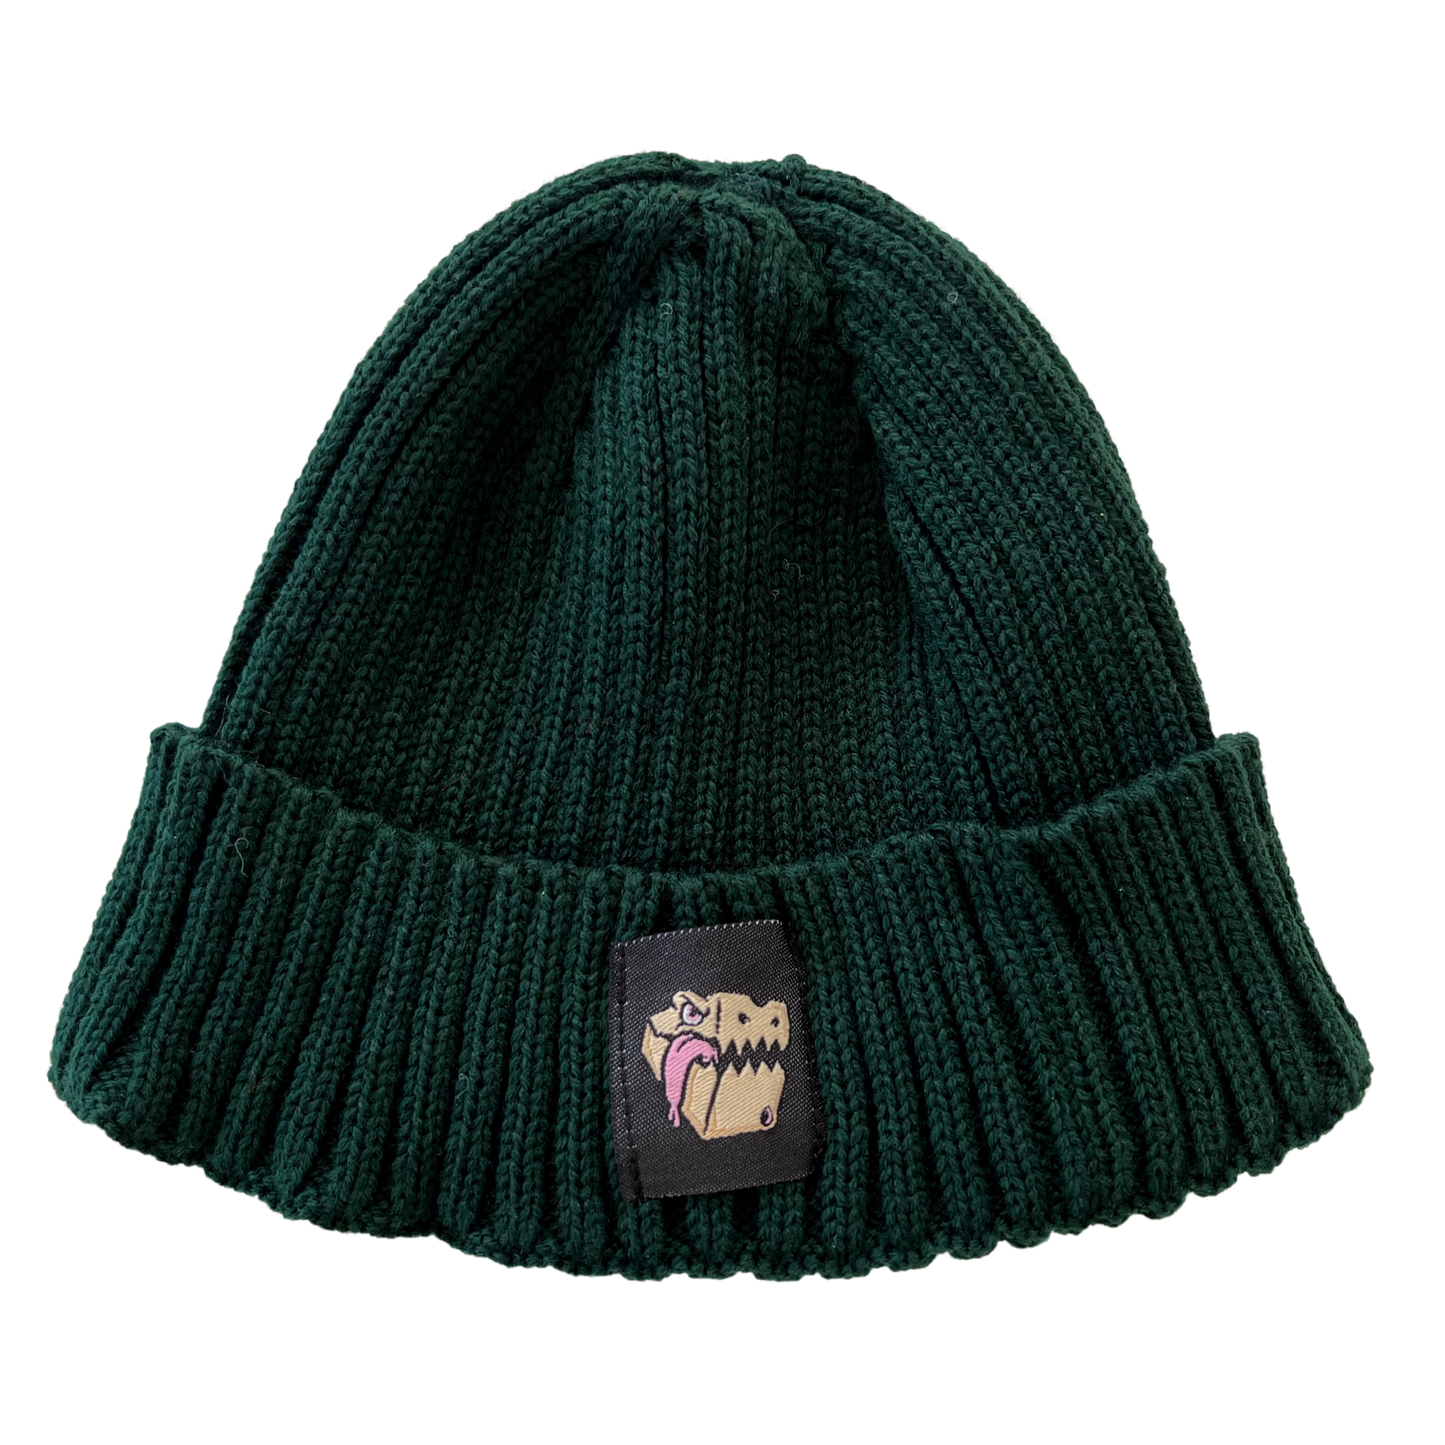 Bad Boxx - Common Treasures: Forest Green Beanie